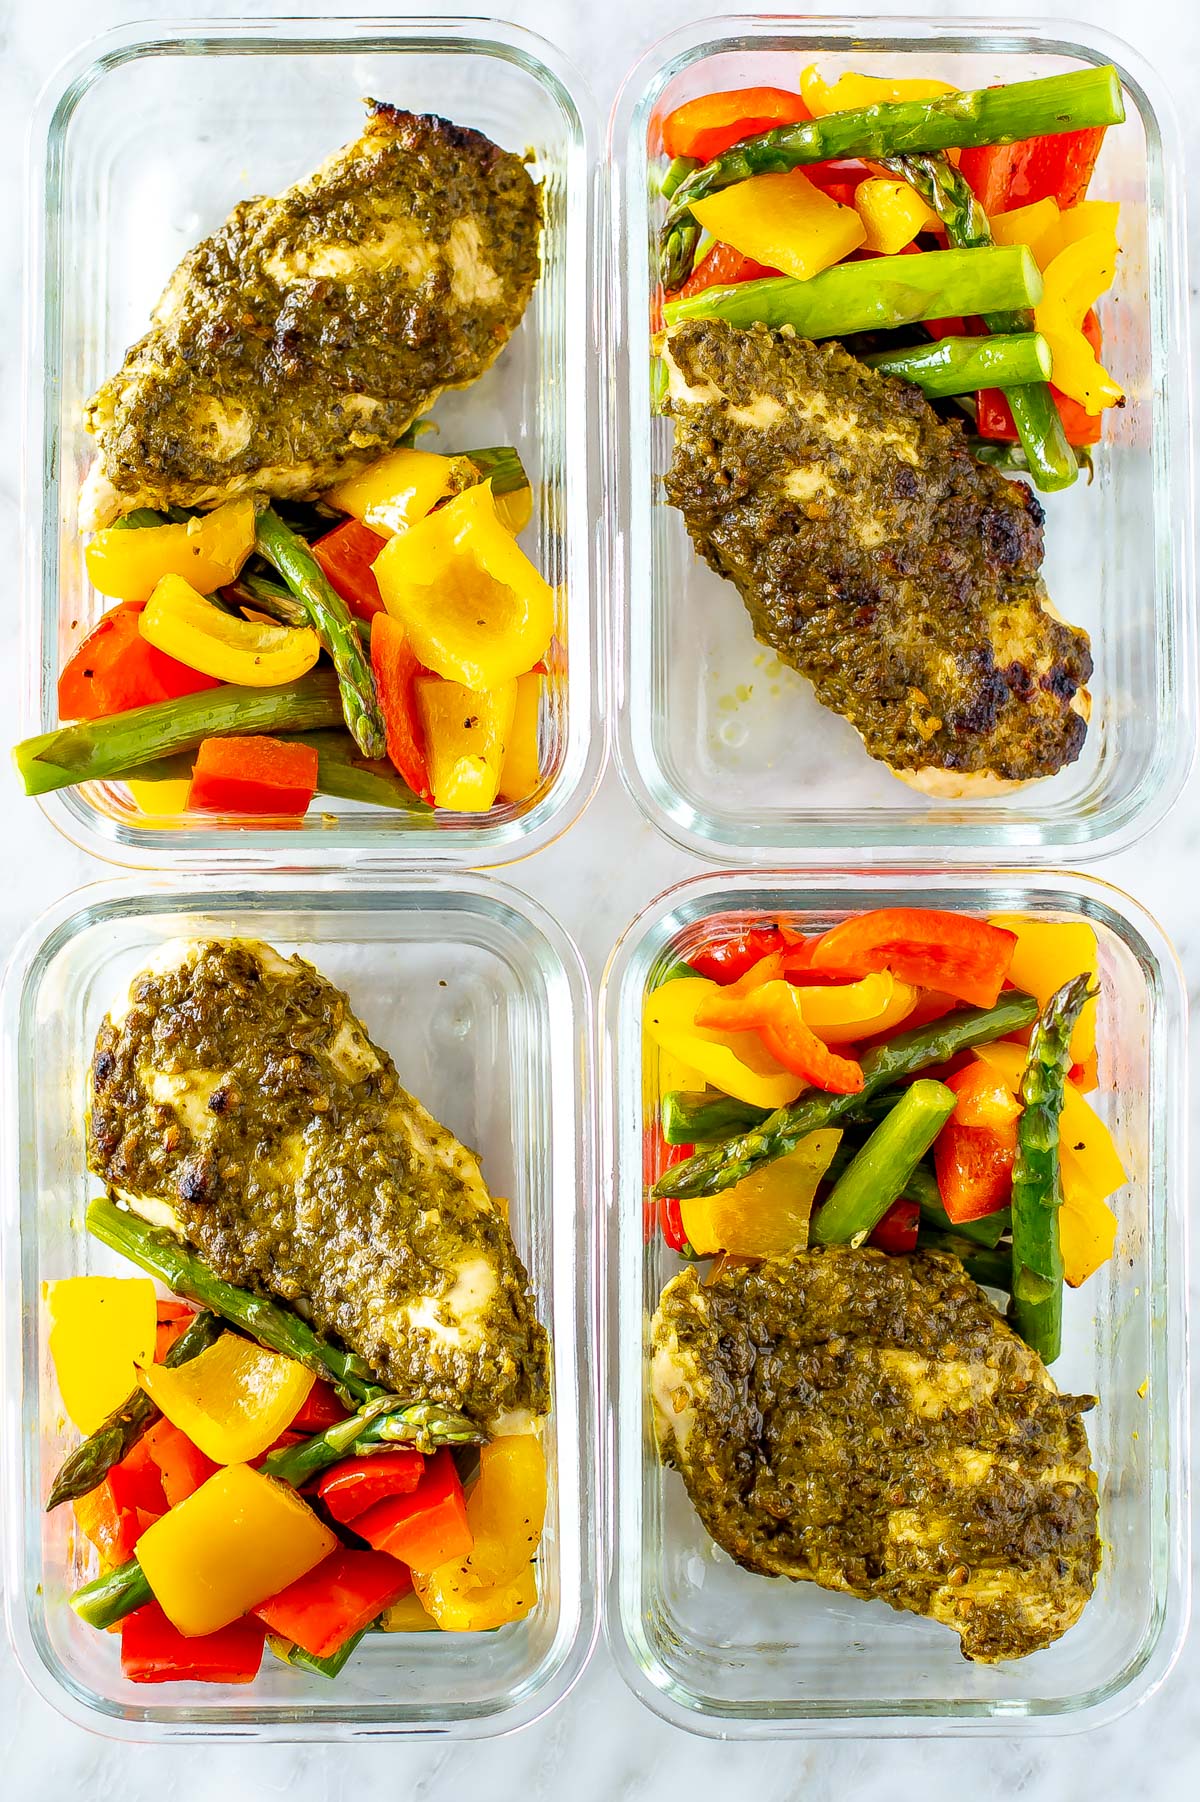 Pesto coated chicken cutlets with asparagus, red pepper and yellow pepper in square glass meal prep containers, zoomed in.